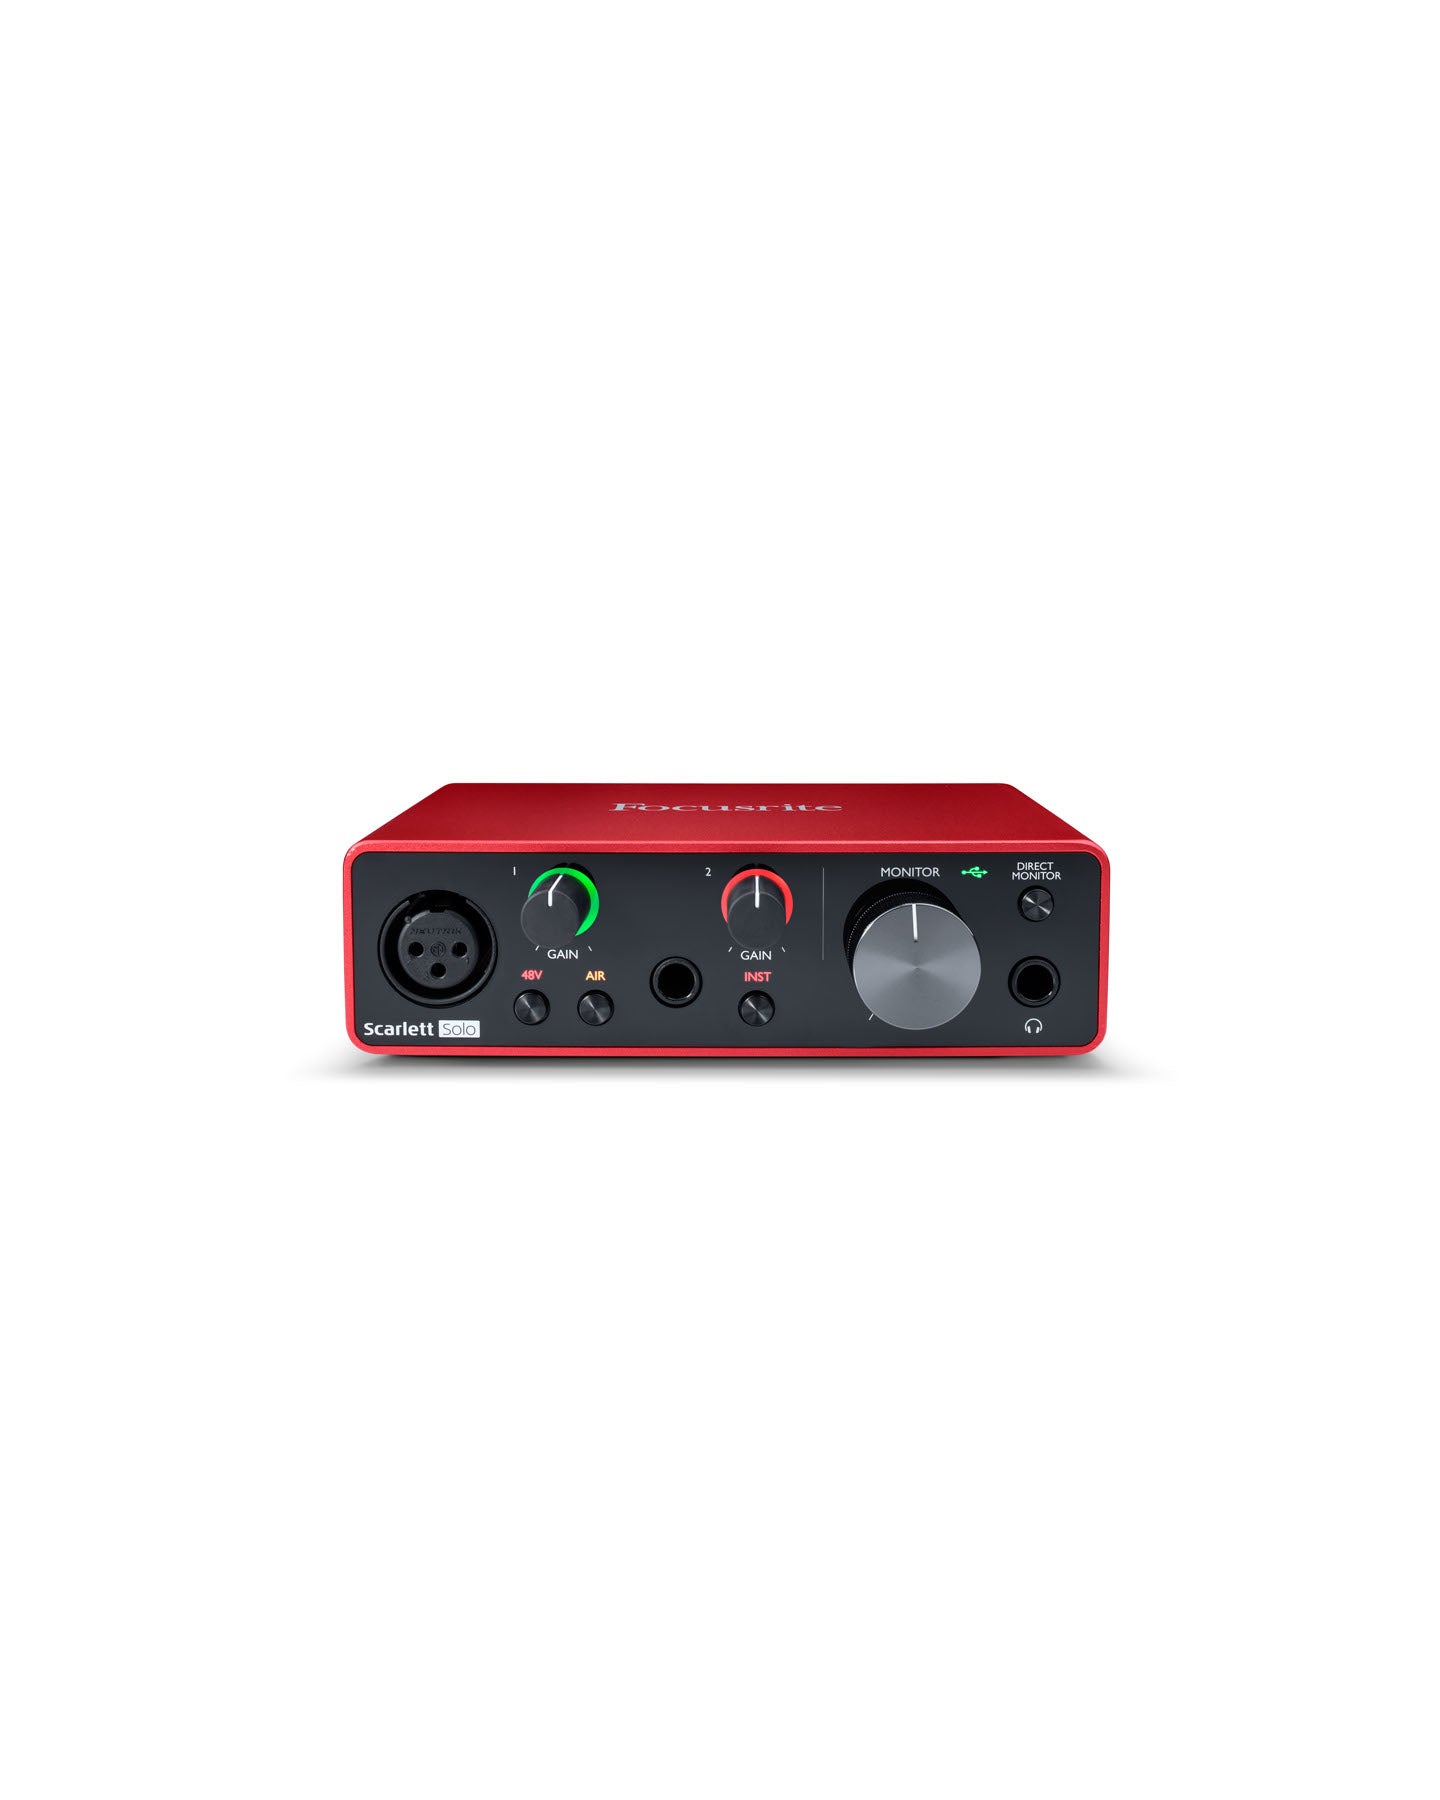 How to set up your audio interface and record audio 